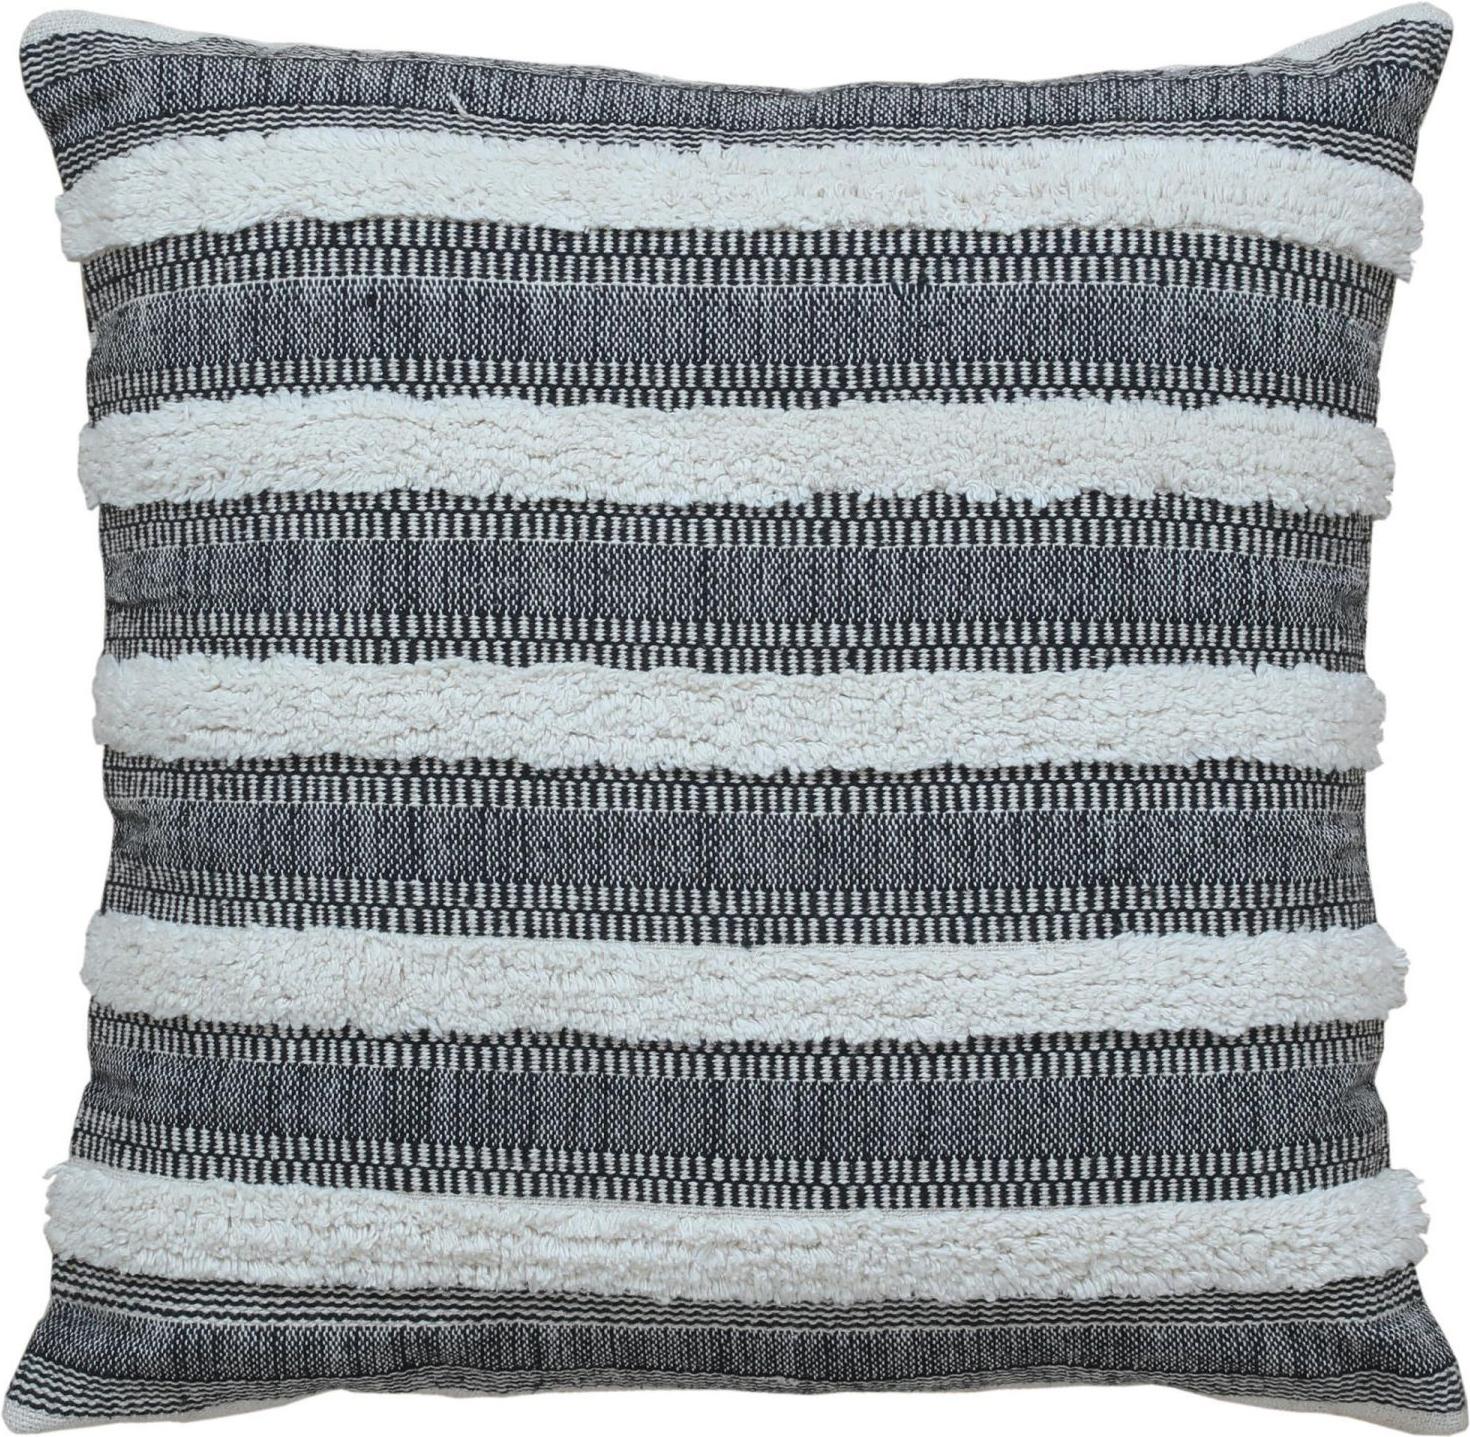 Hand-Knotted Gray Boho Chic Wool and Cotton Pillow With Geometric Design For Sale